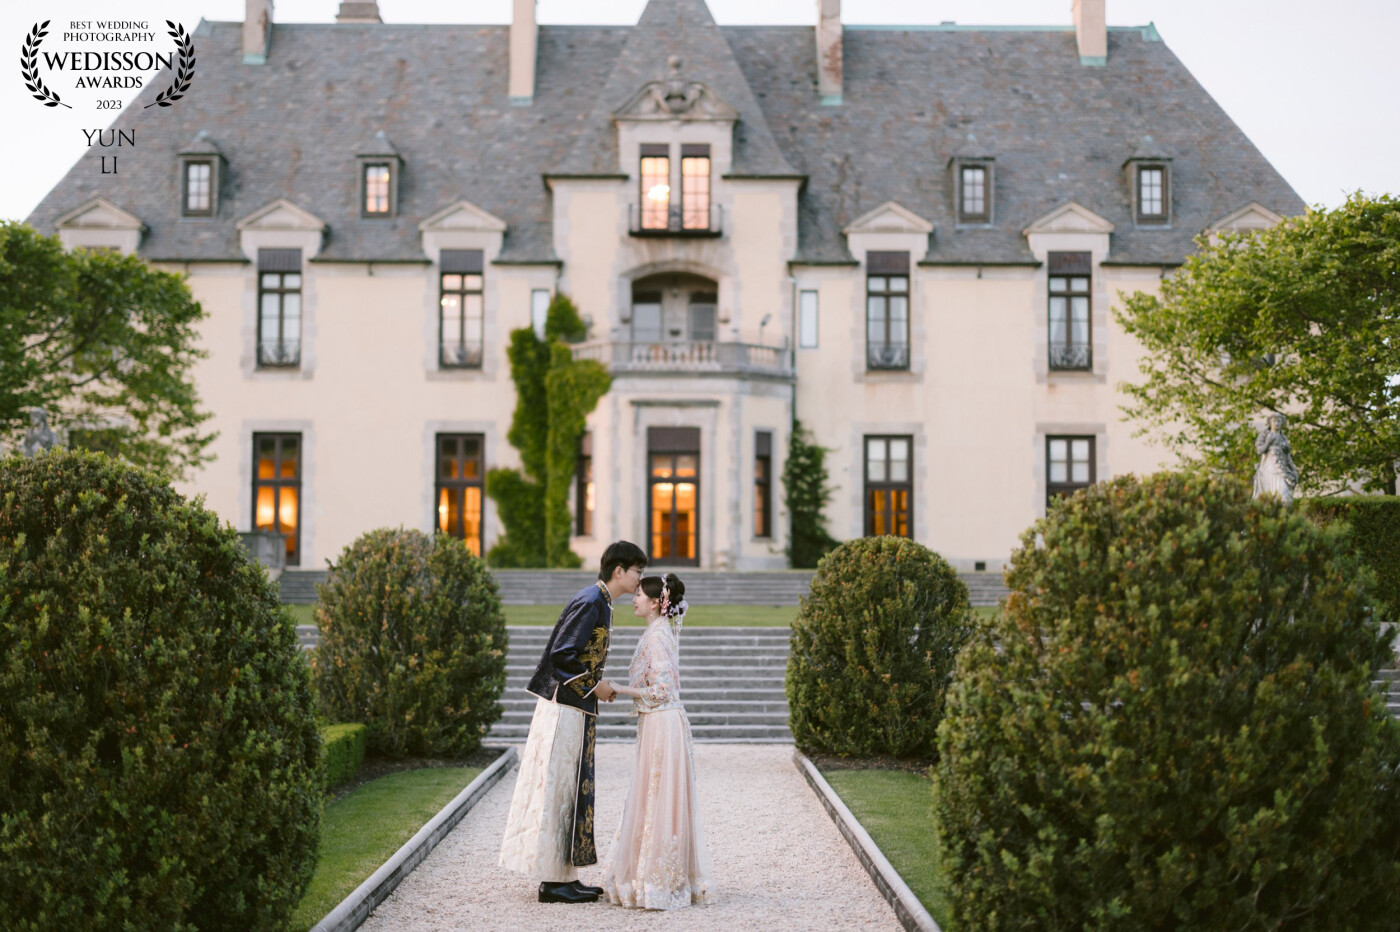 Bride and groom were wearing Chinese wedding outfits for their traditional Chinese wedding ceremony at the iconic wedding venue Oheka Castle in Long Island, New York.